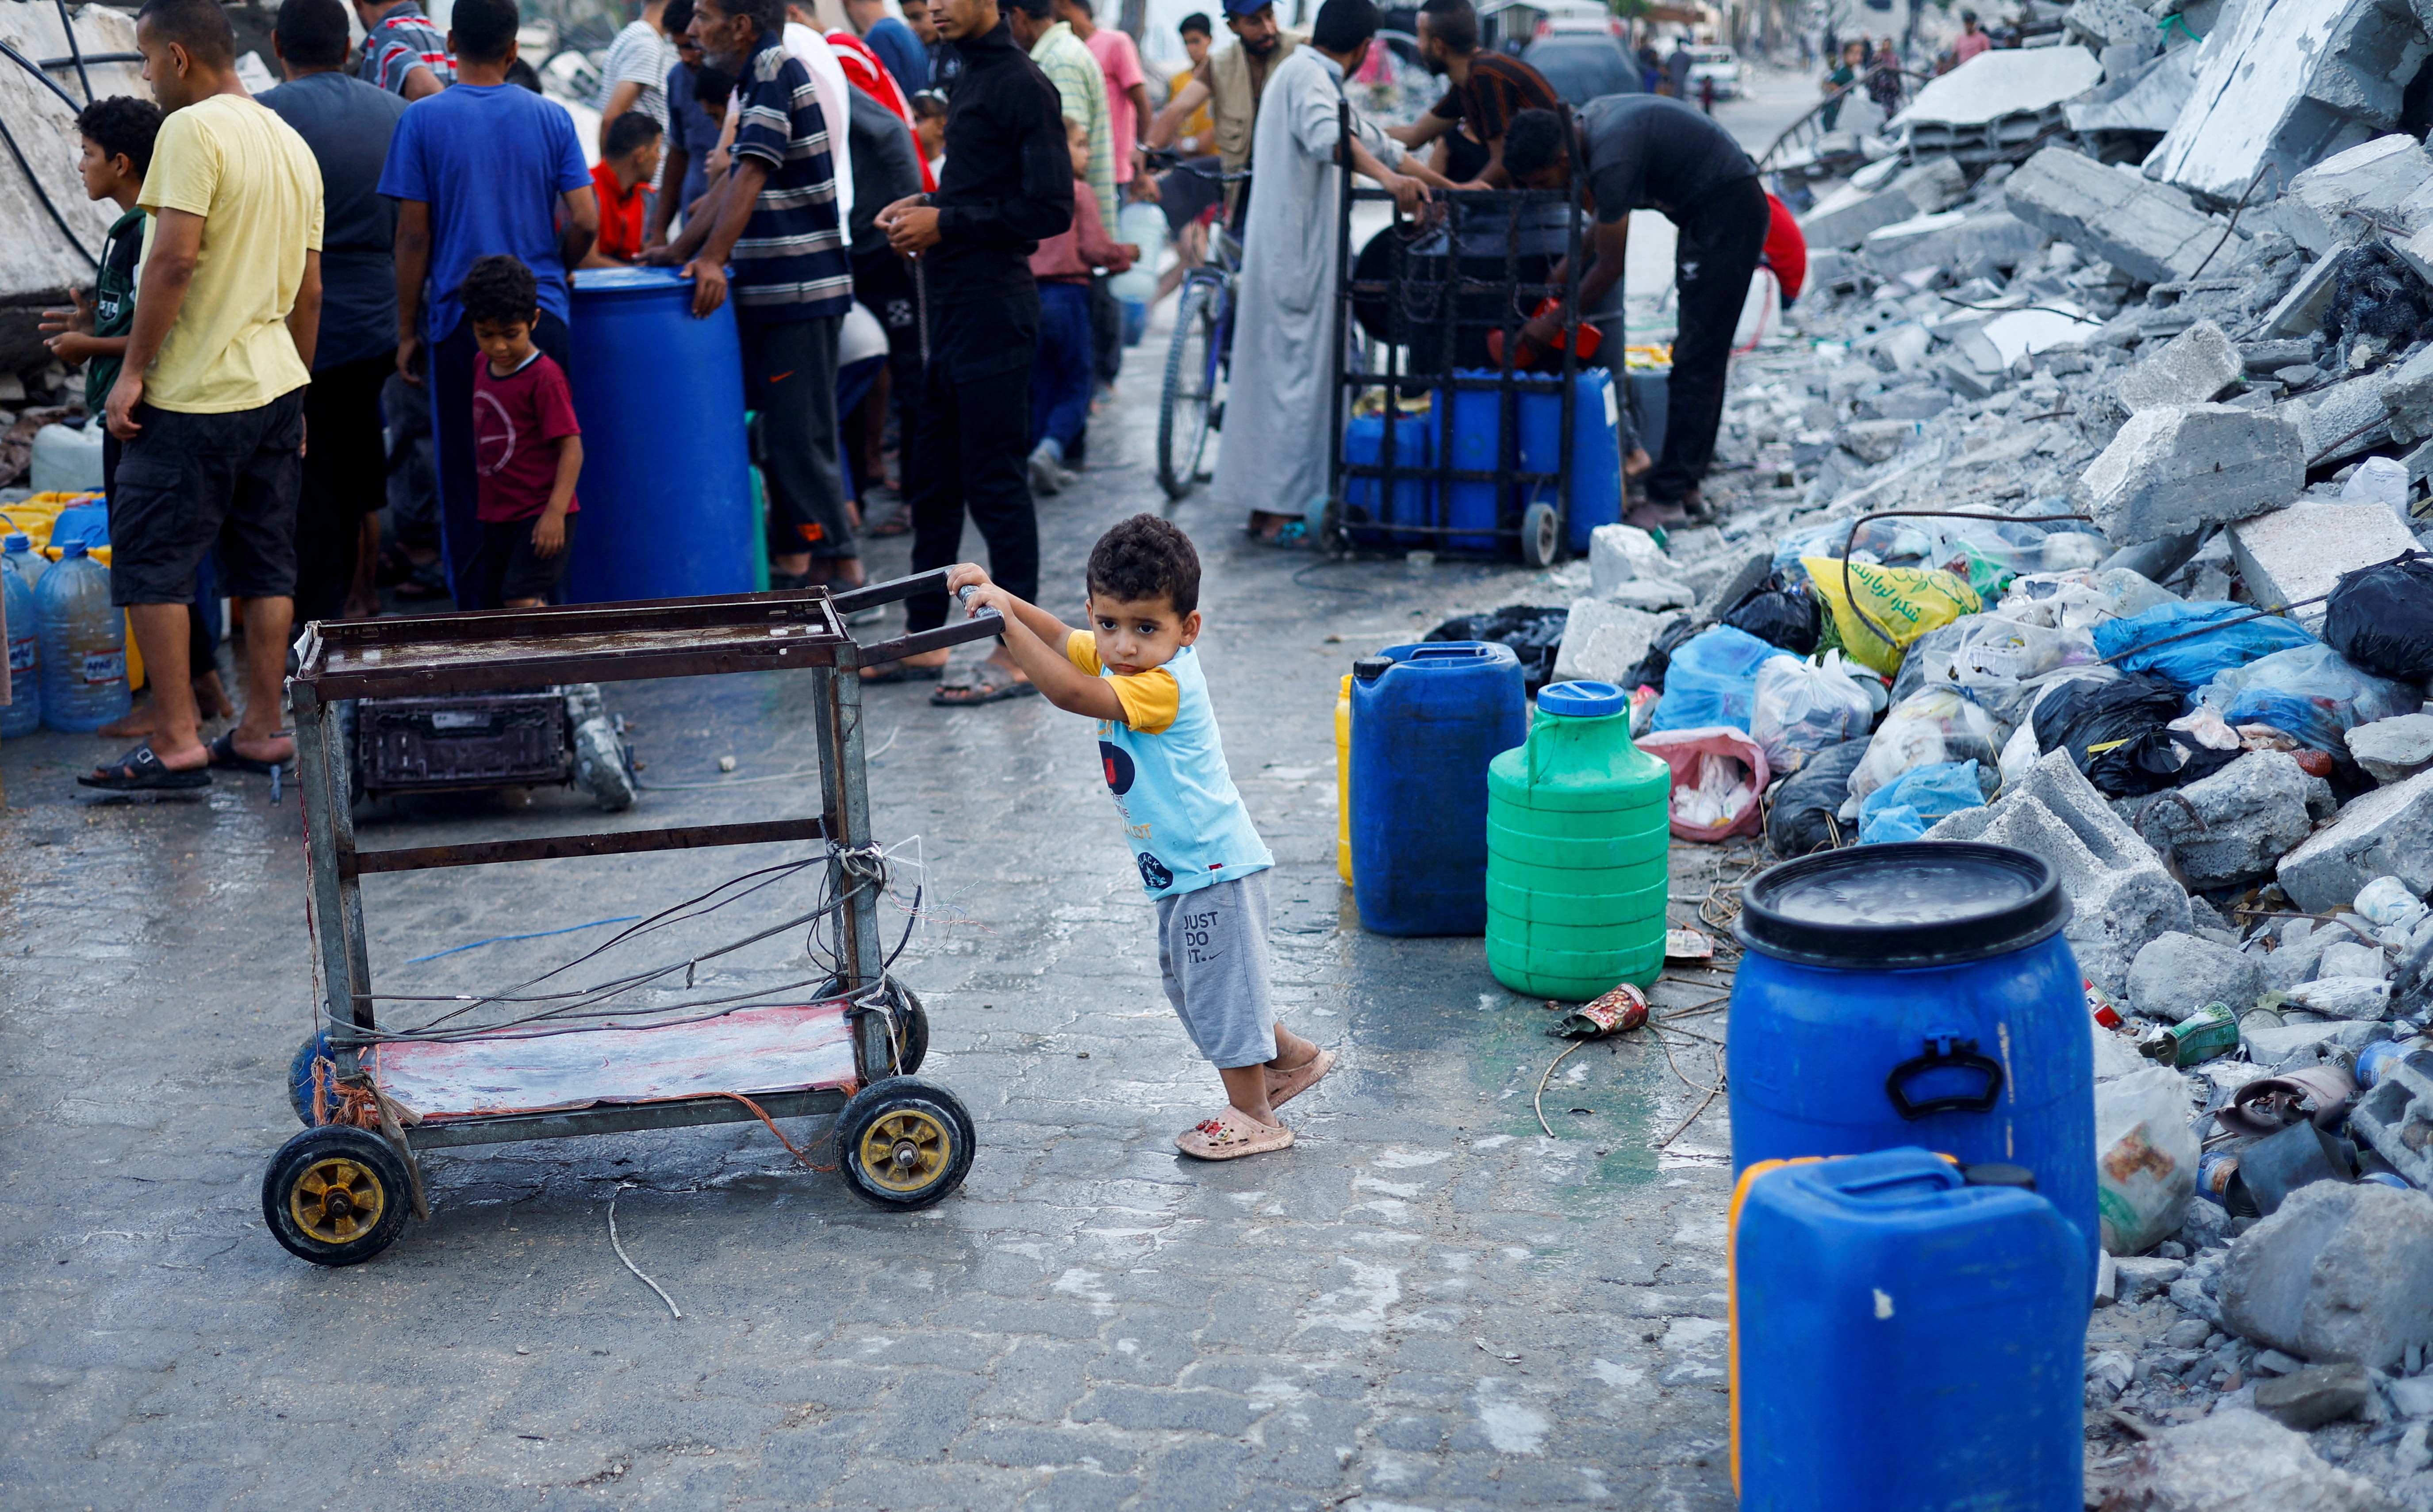 A Palestinian child stands next to water containers, amid the ongoing conflict between Israel and Hamas, in southern Gaza City, in the Gaza Strip